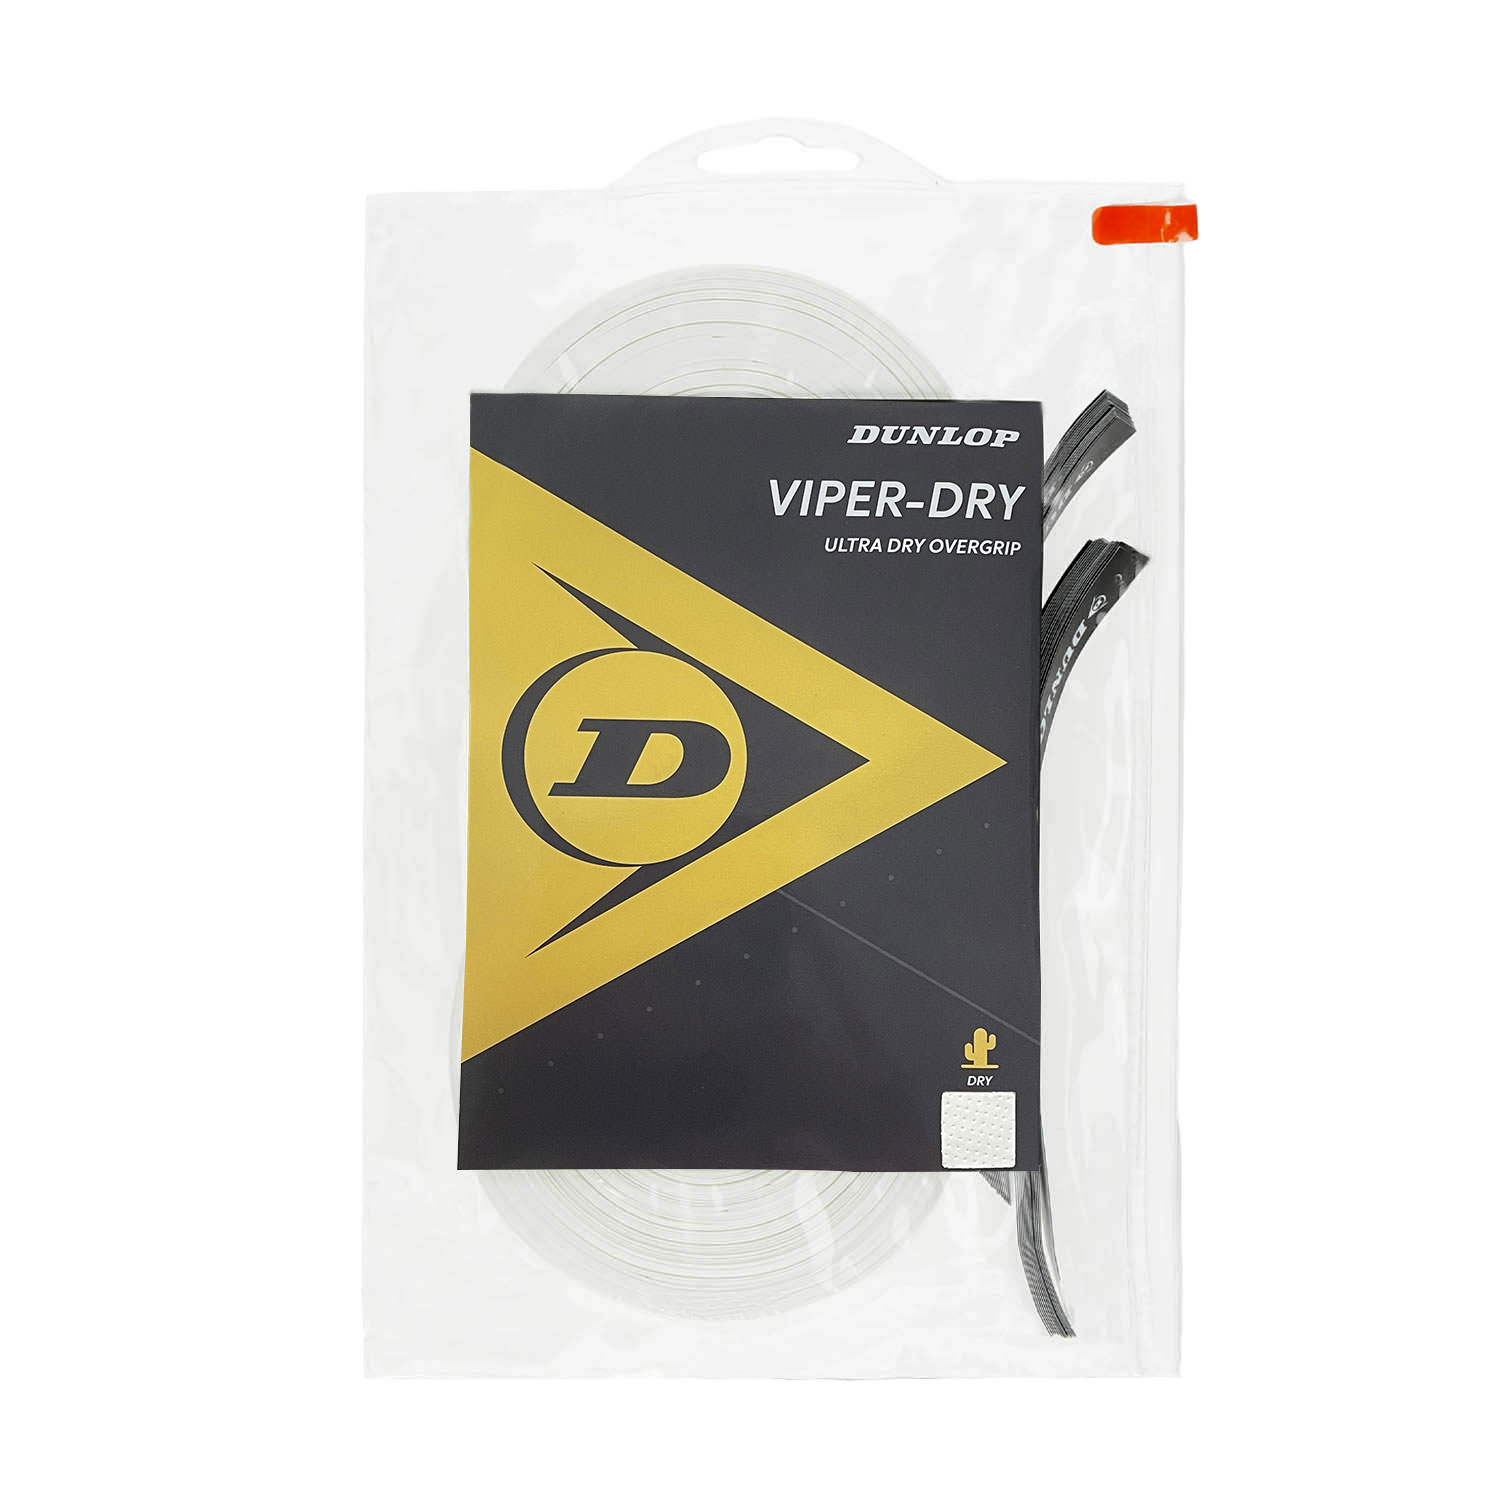 Dunlop ViperDry Overgrip x 30 - White